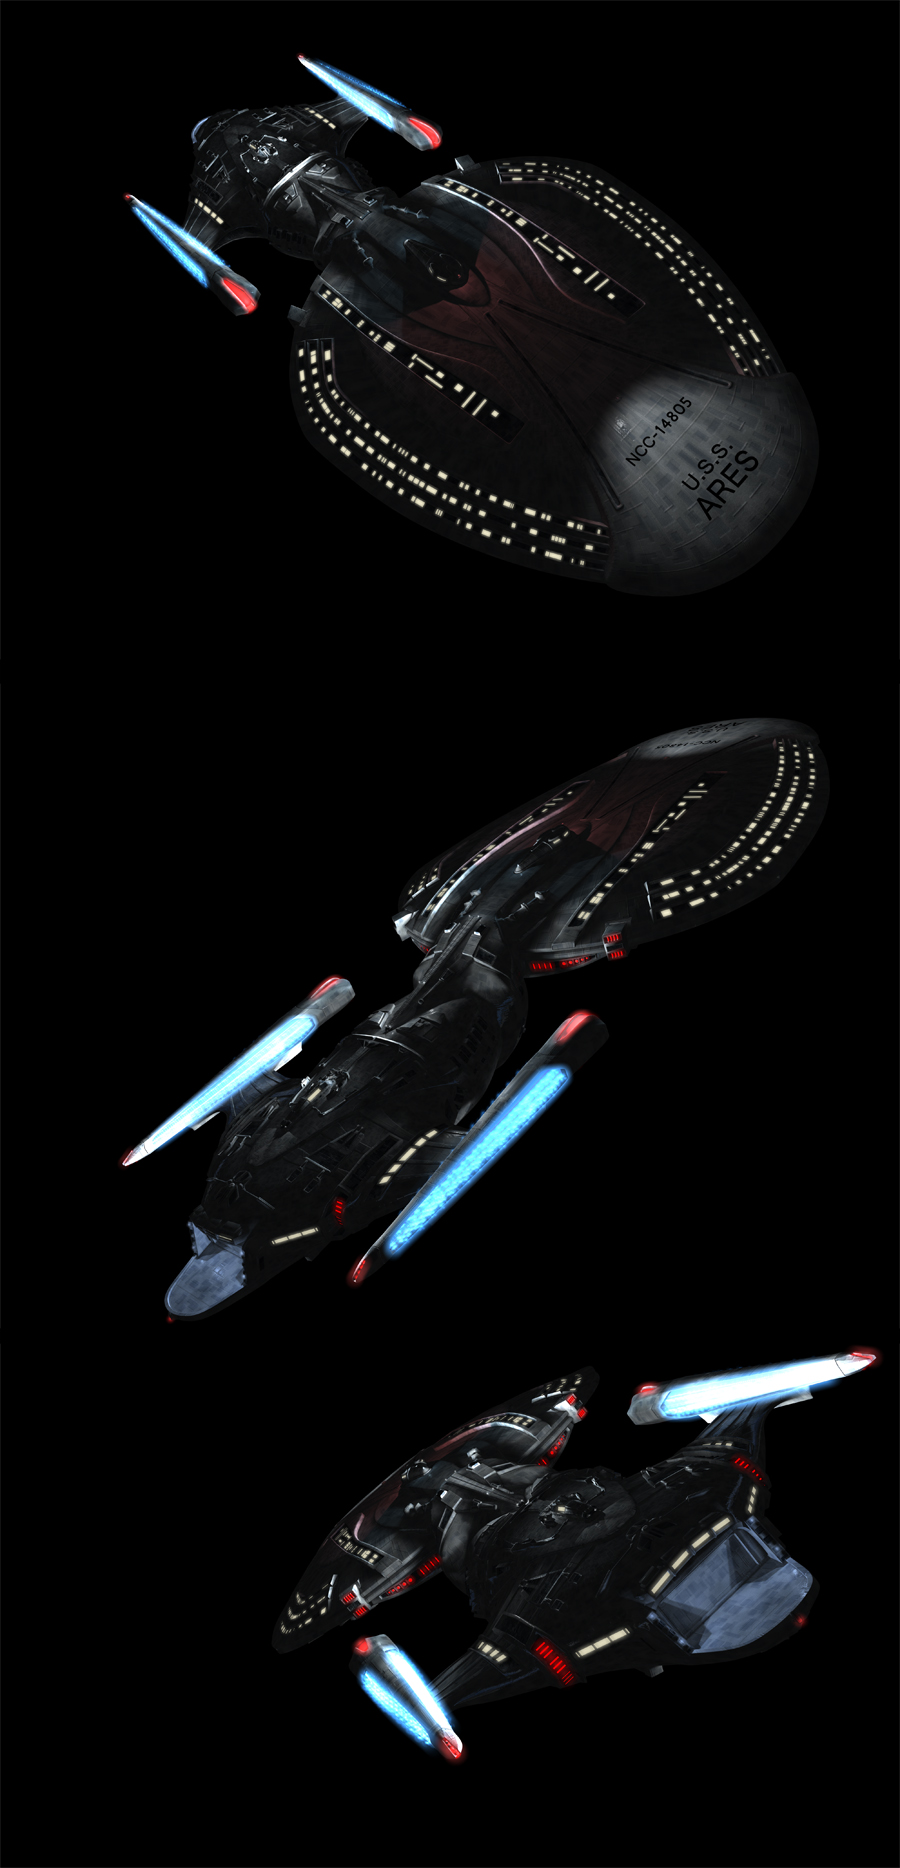 U.S.S. Ares